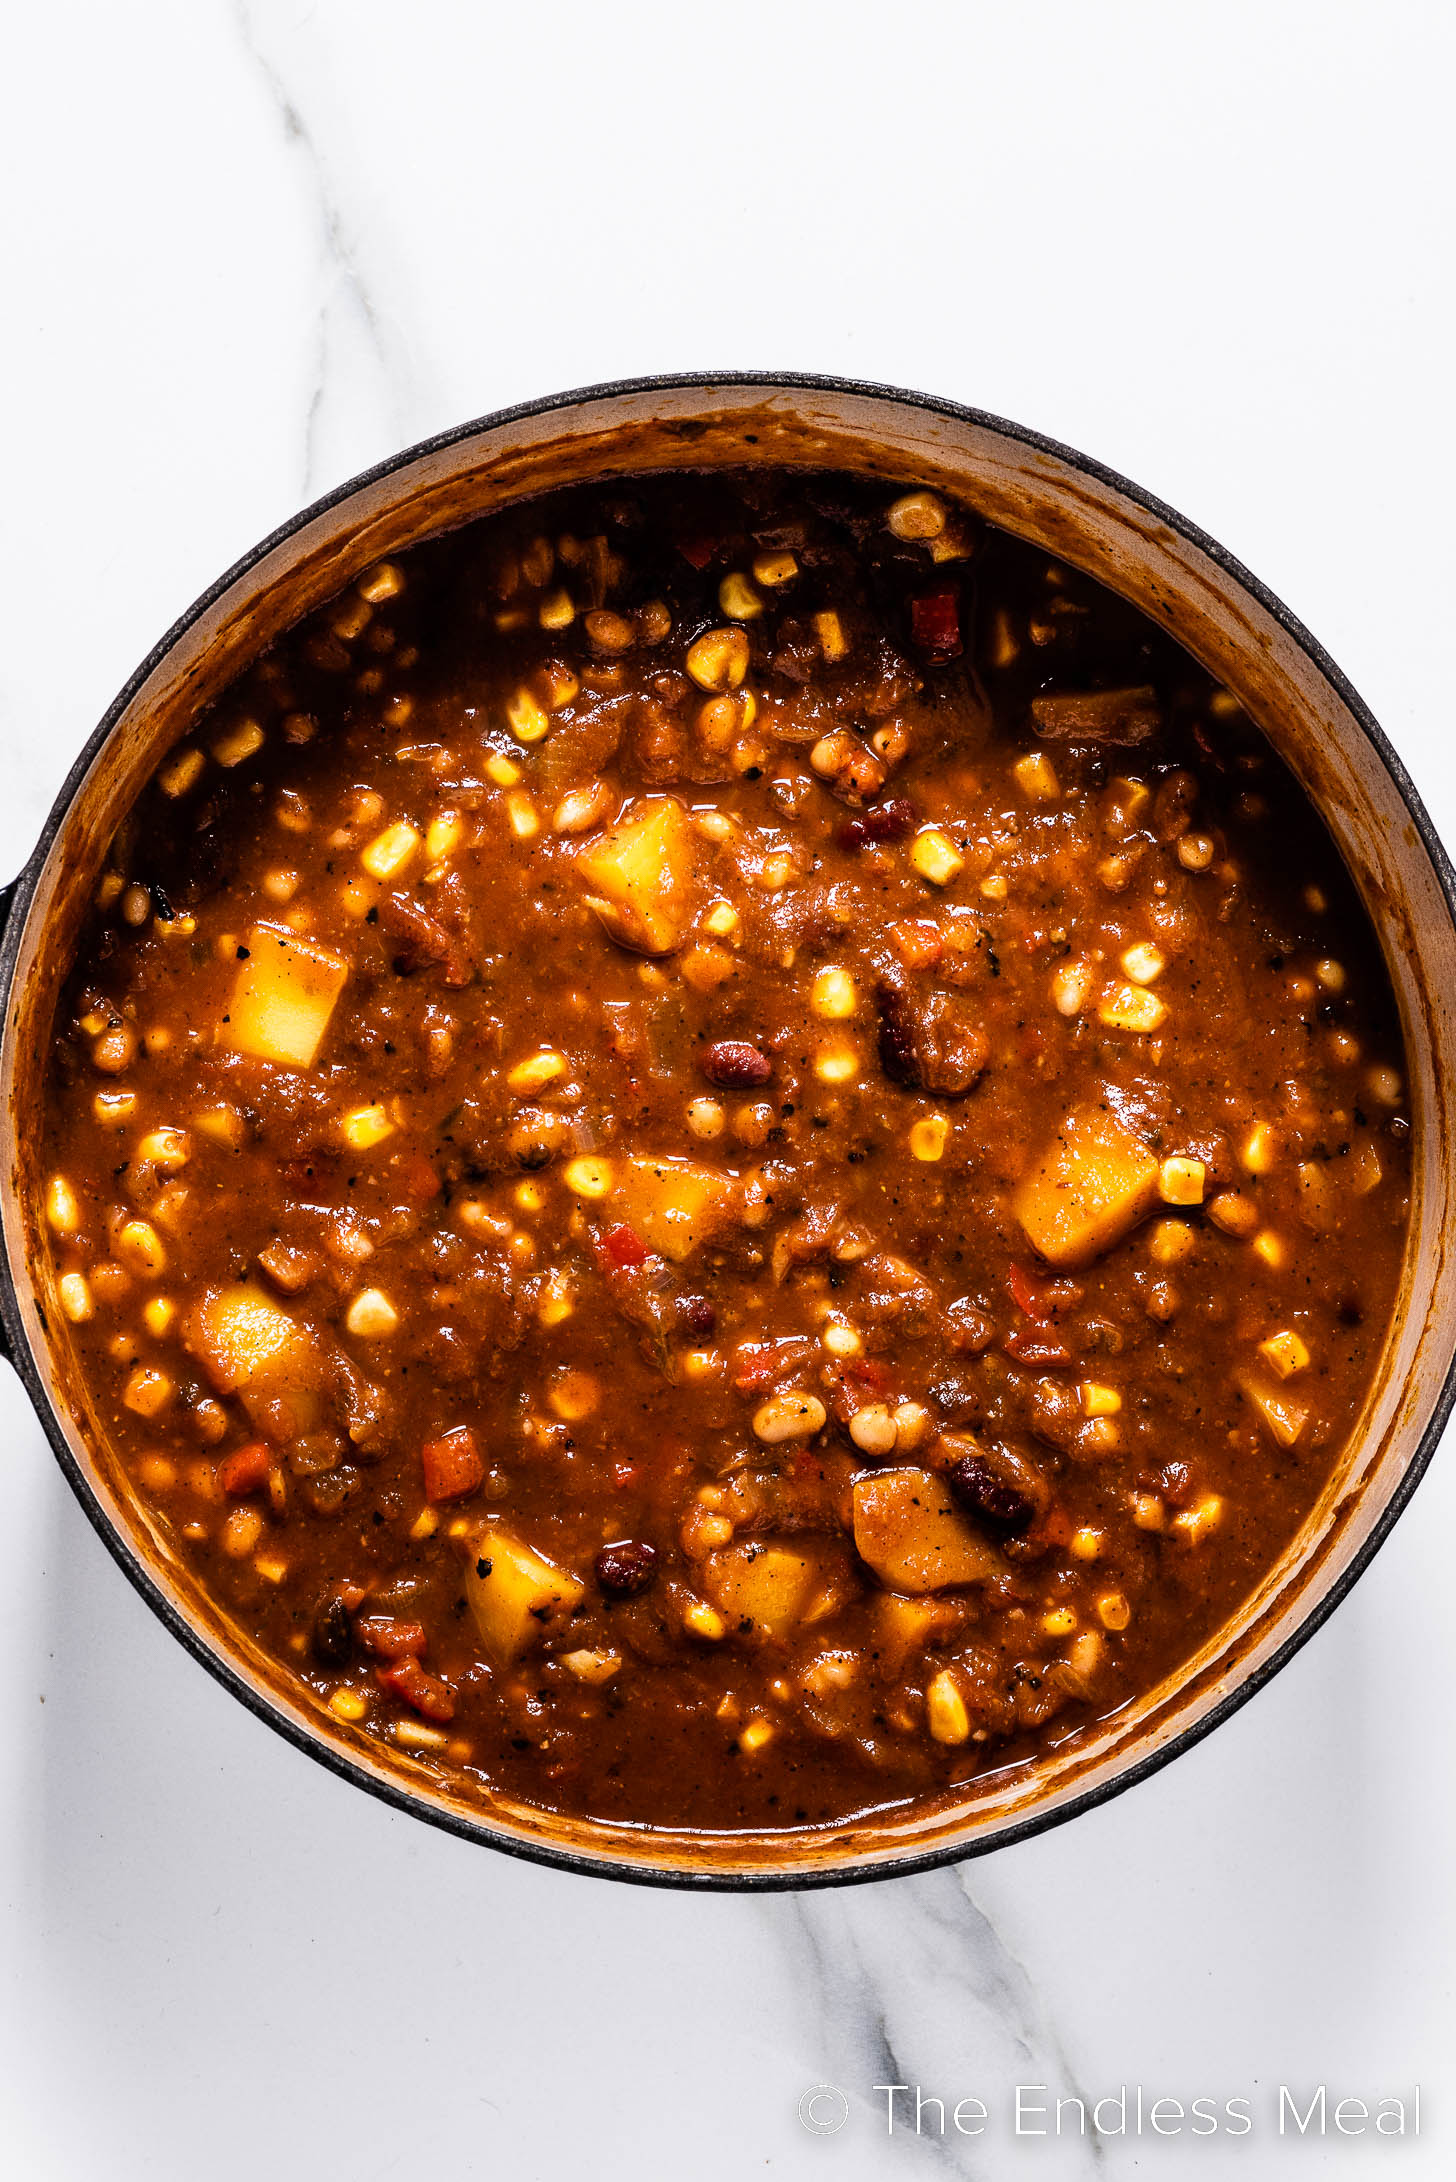 This chili recipe with pumpkin in a pot.